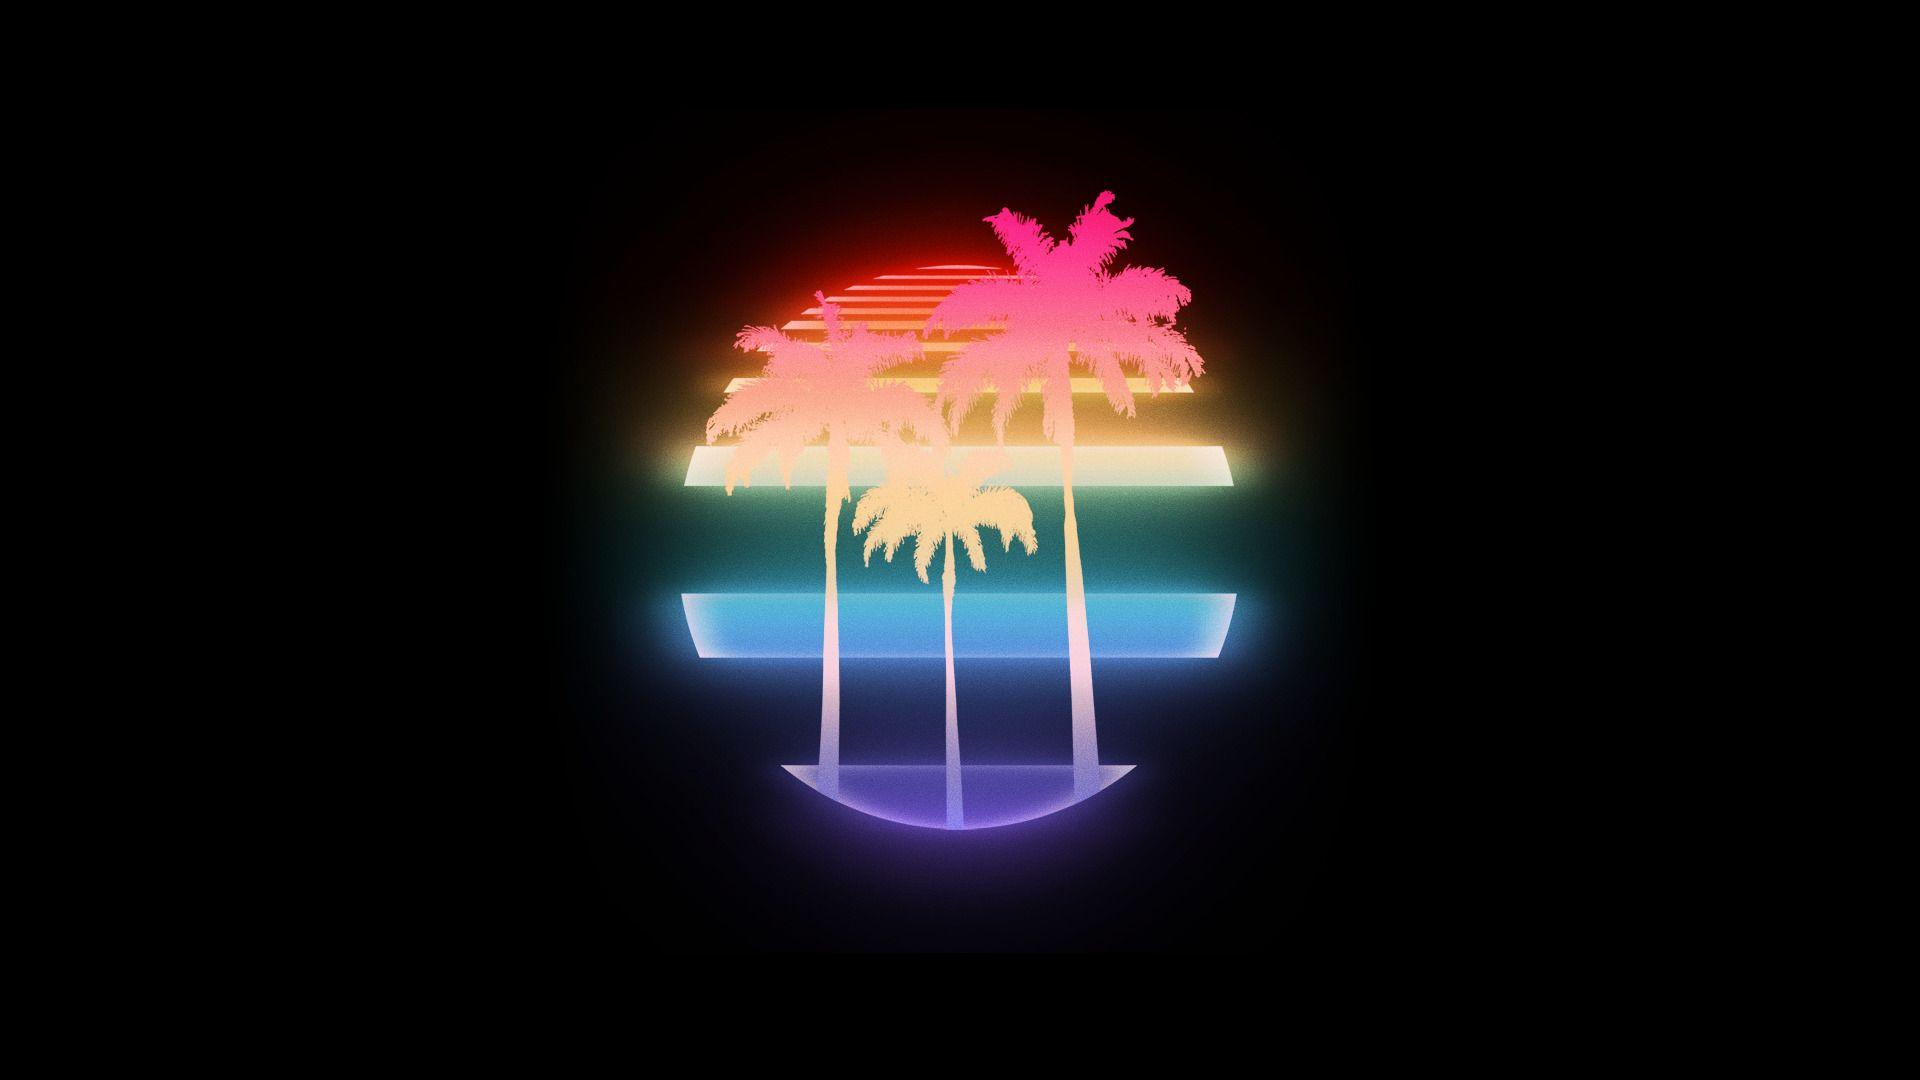 VHS, Palm trees, 1980s, New Retro Wave, Retro style, Vintage, Sunset, Vaporwave, Neon, Grand Theft Auto Vice City, Miami Vice, Digital art, Minimalism, Video games Wallpaper HD / Desktop and Mobile Background